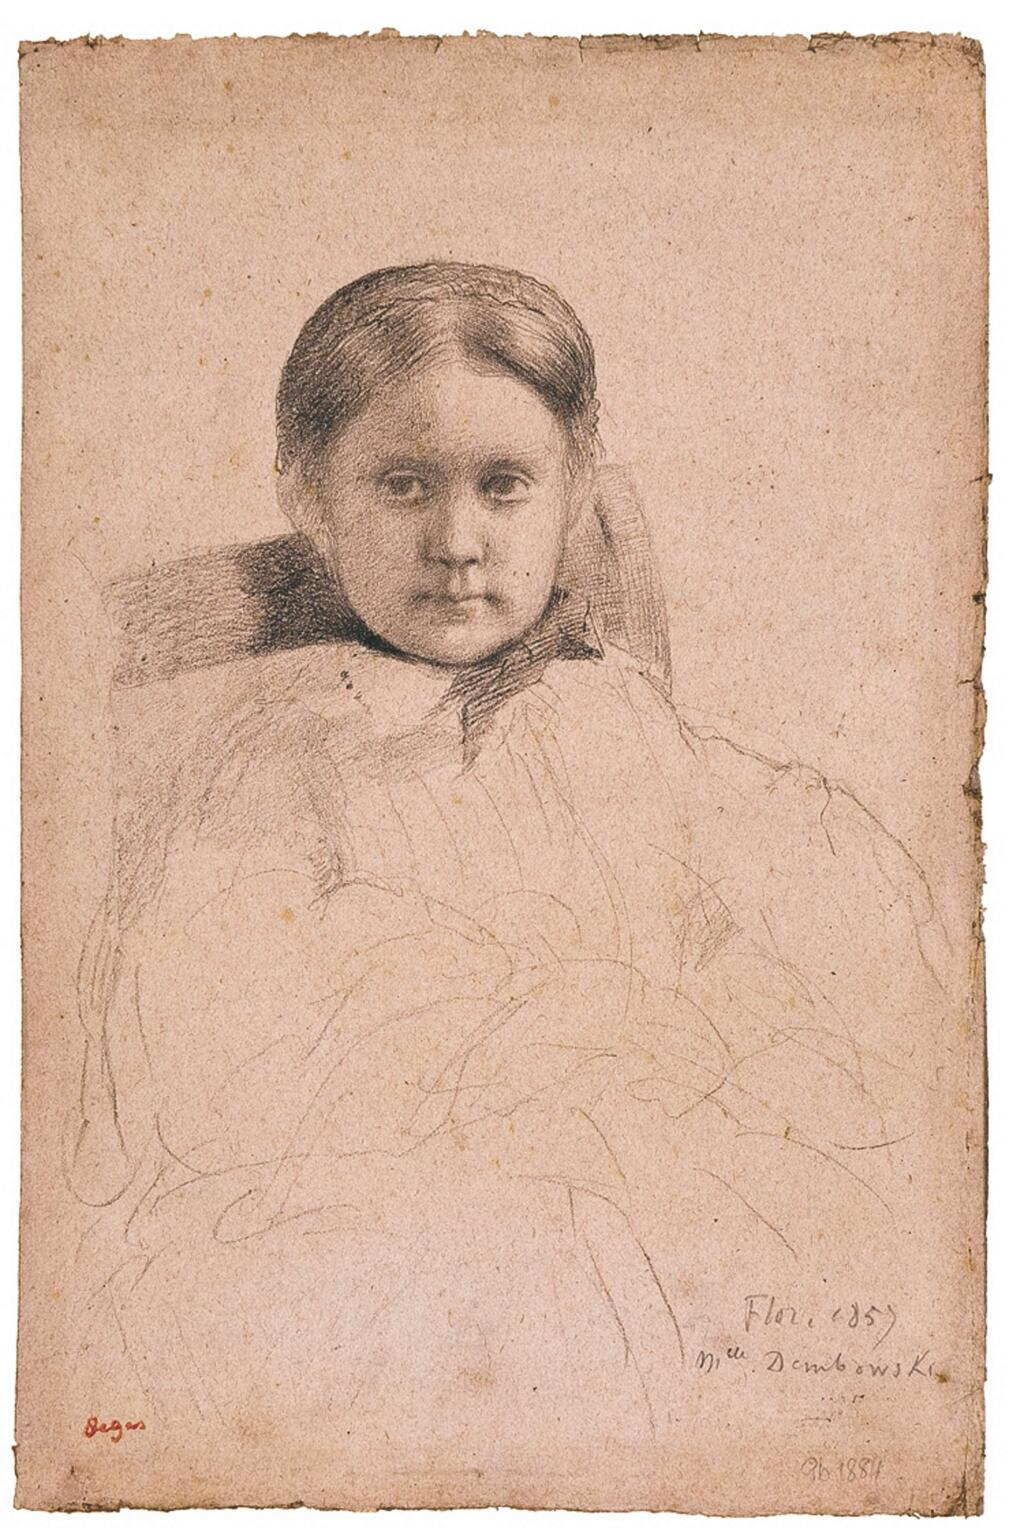 The Petaluma Arts Center will host 'Edgar Degas: The Private Impressionist, Works on Paper by the Artist and his Circle,' on view from June 20 through July 26, 2015. Shown: Degas portrait of Mlle Dembowska, black crayon on pink paper, 1858-1859. (NAPLES MUSEUM PETALUMA ART CENTER)